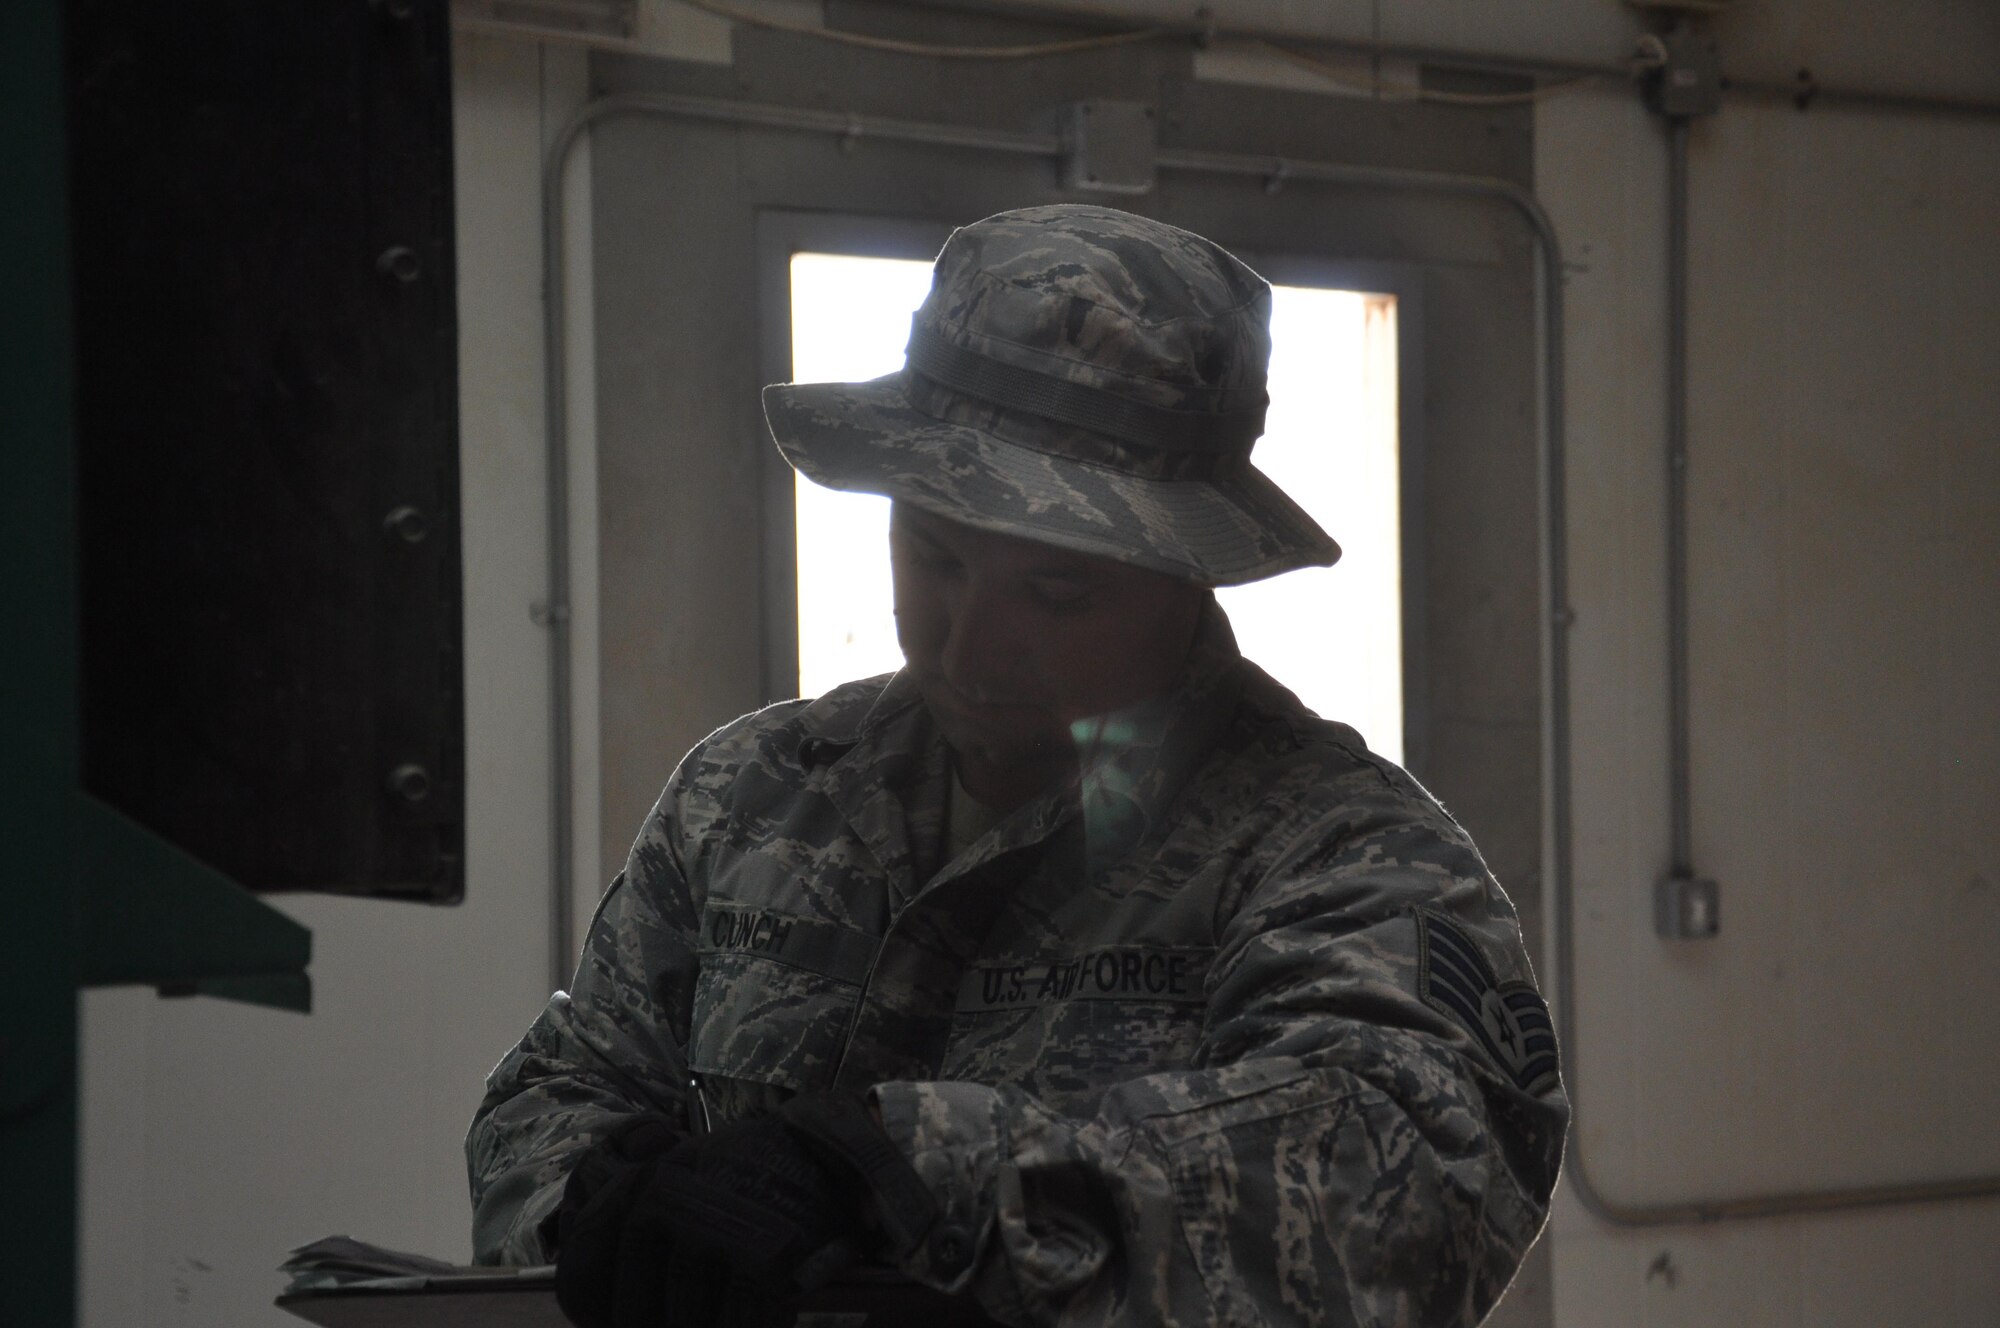 Staff Sgt. Jason D. Clinch, a generator maintenance program manager with the 386th Expeditionary Civil Engineer Squadron, writes down instrument data from a power generator during a preventative maintenance check Wednesday May 10, 2017, at an undisclosed location in Southwest Asia.  The power generator serves as a supplement to the host nation electrical grid. Staff Sergeant Clinch is deployed from the 30th Space Wing, Vandenberg Air Force Base, Calif.